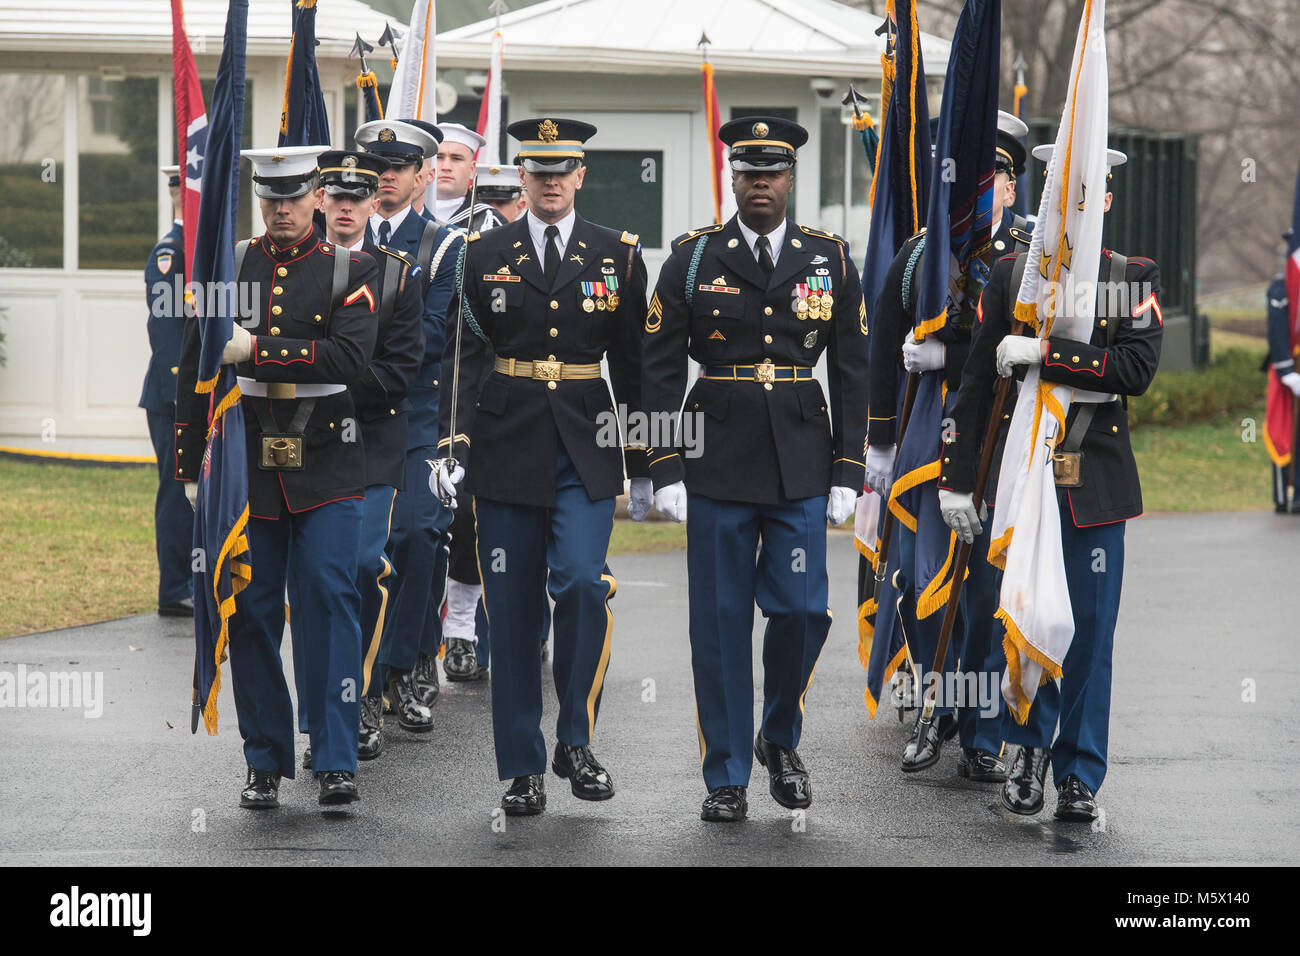 U.S. service members march in formation during an armed forces full honor cordon in honor of Australian Prime Minister at the White House in Washington, D.C., Feb. 23, 2018. (U.S. Army photo by Zane Ecklund) Stock Photo